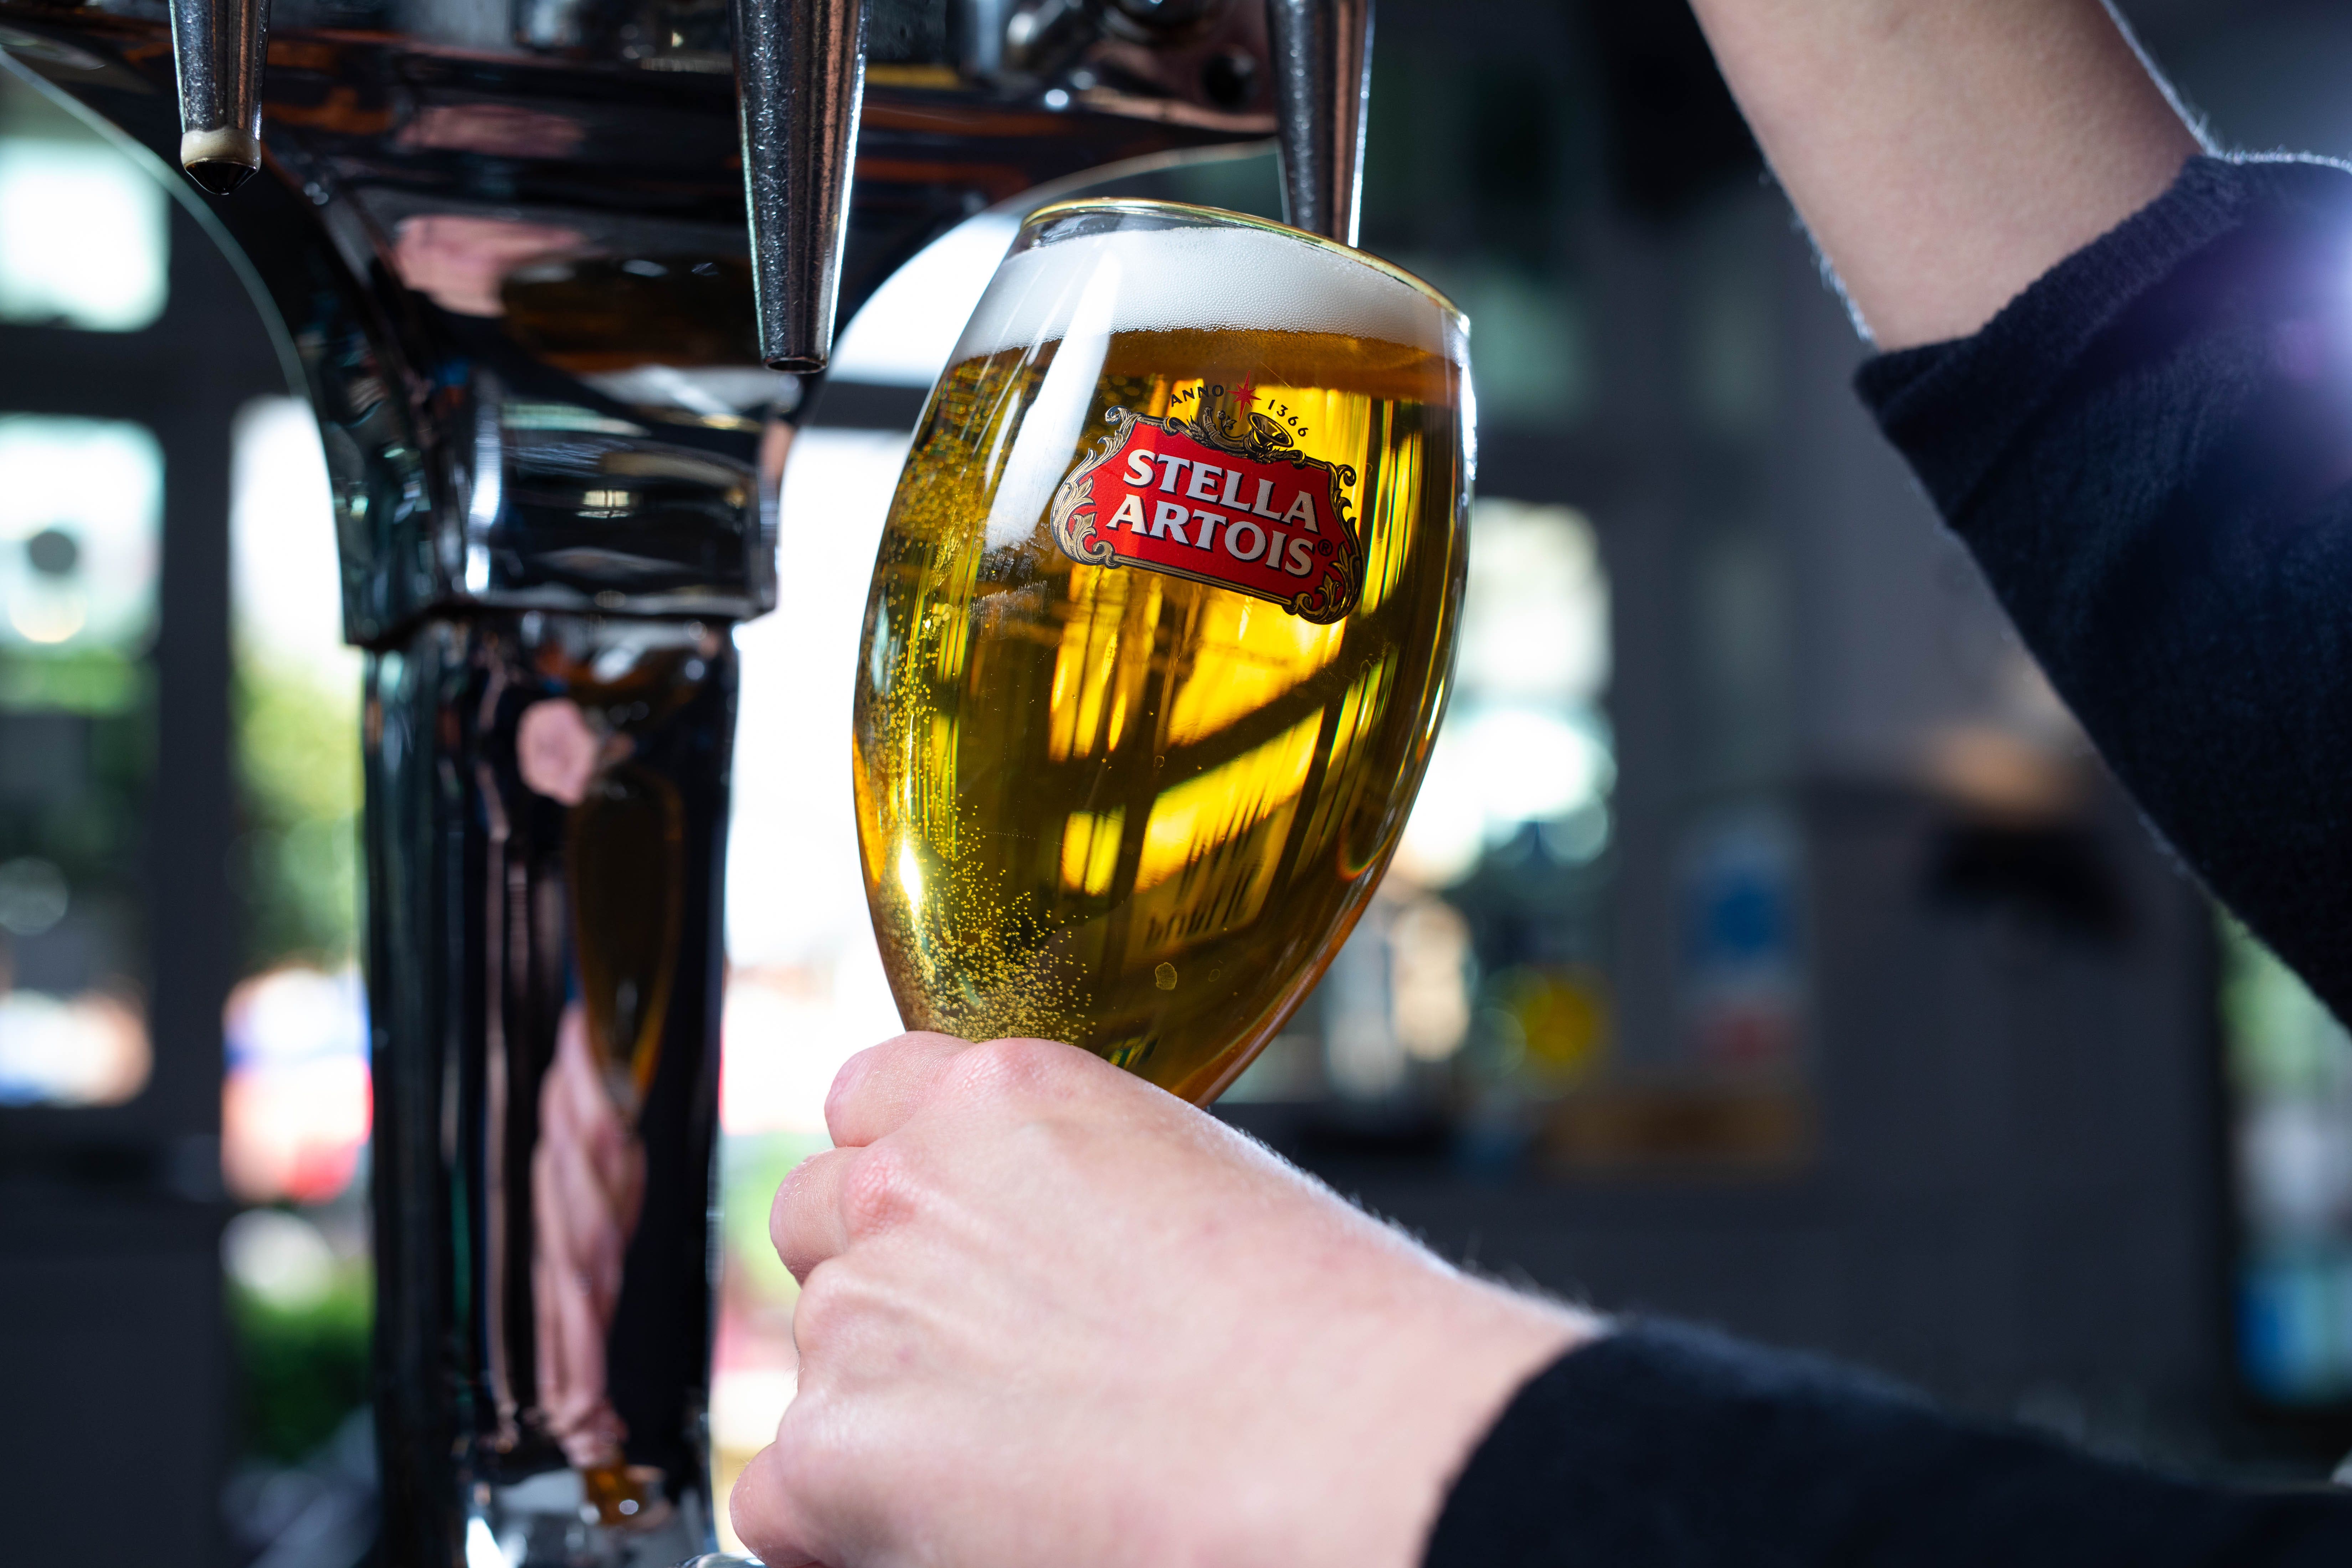 The chain has more than 1,400 pubs across the UK